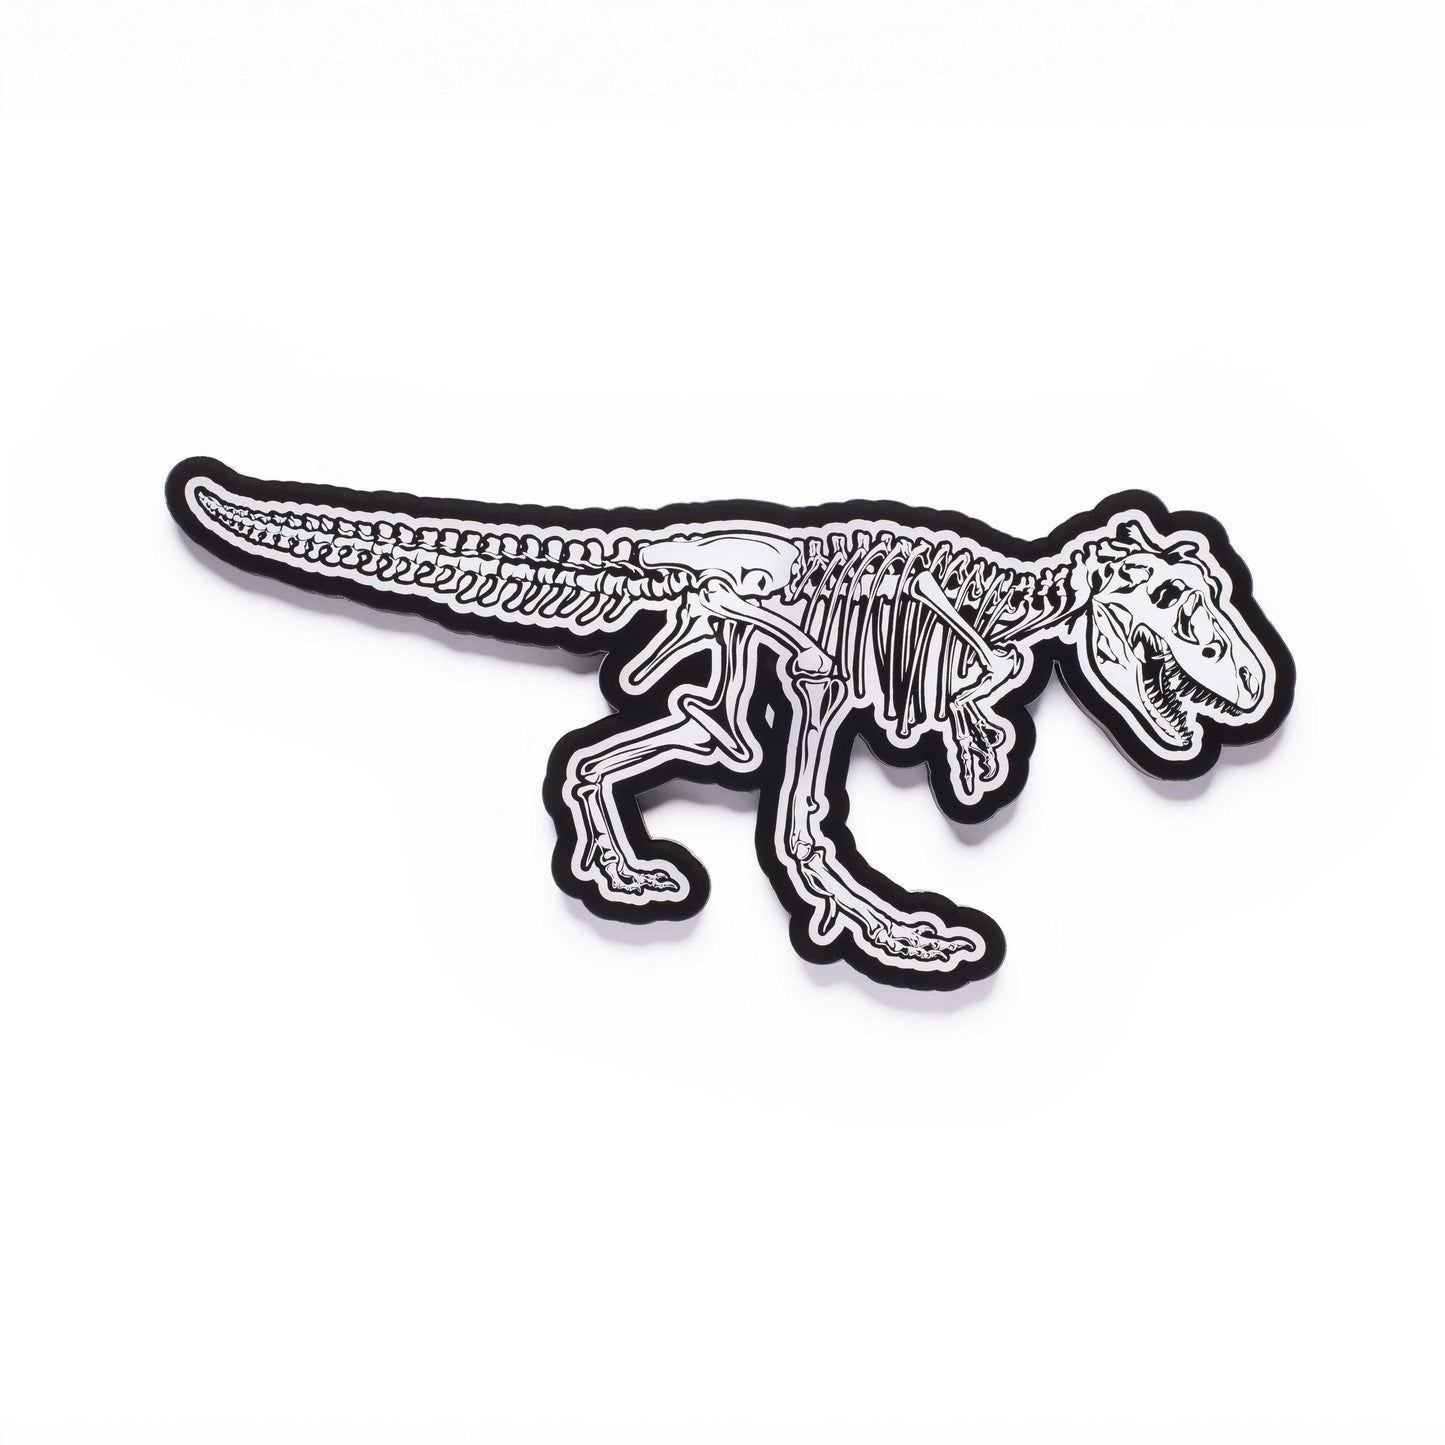 image of a 3d wall mounted acrylic light featuring an epic dinosaur themed illustration of a t-rex skeleton.